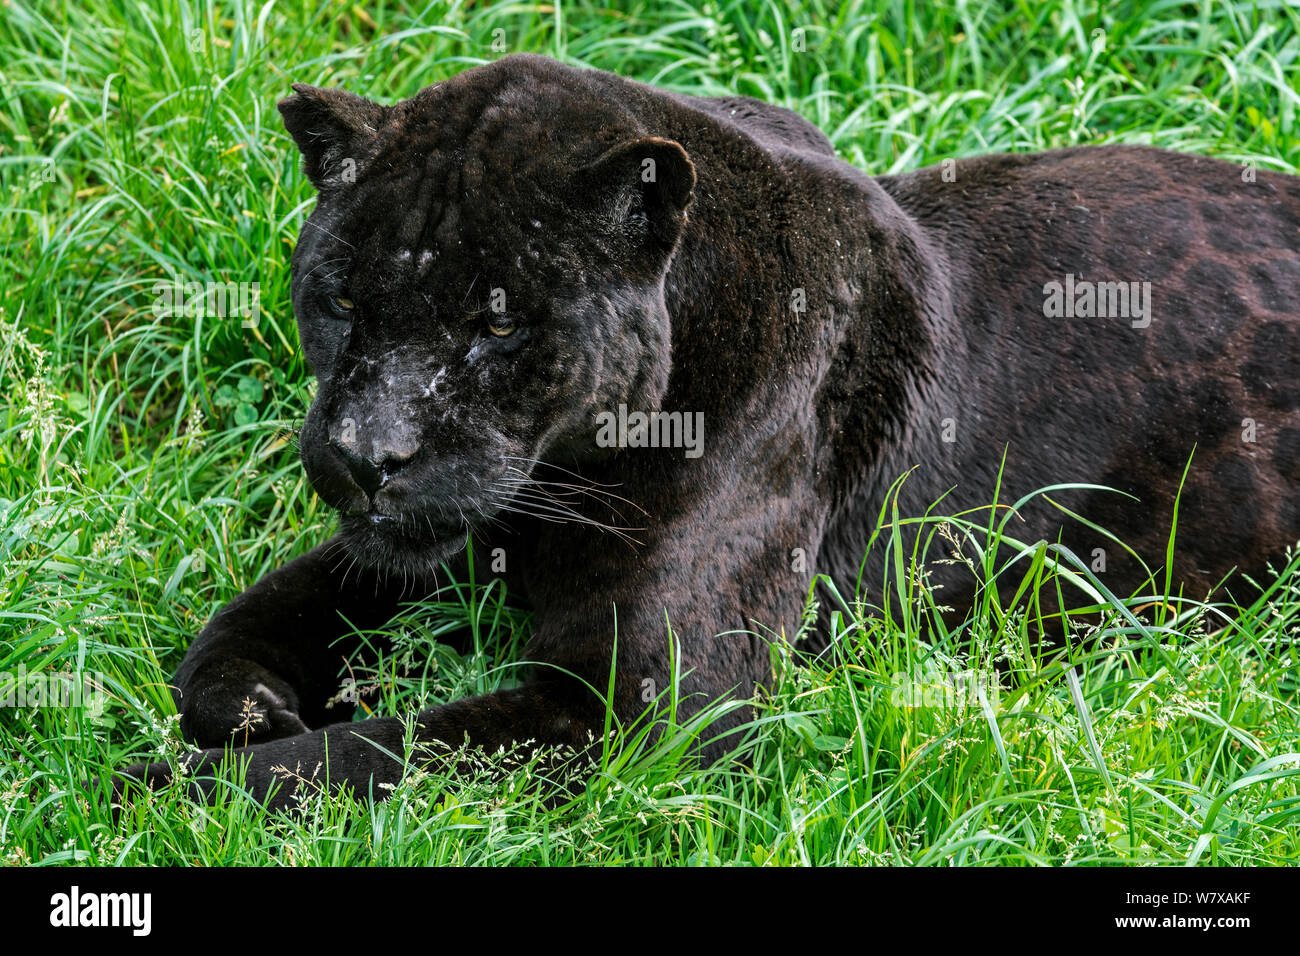 Black / melanistic jaguar (Panthera onca) with spots visible, lying in the grass, Cabarceno Park, Cantabria, Spain. Captive, occurs in Central and South America. Stock Photo